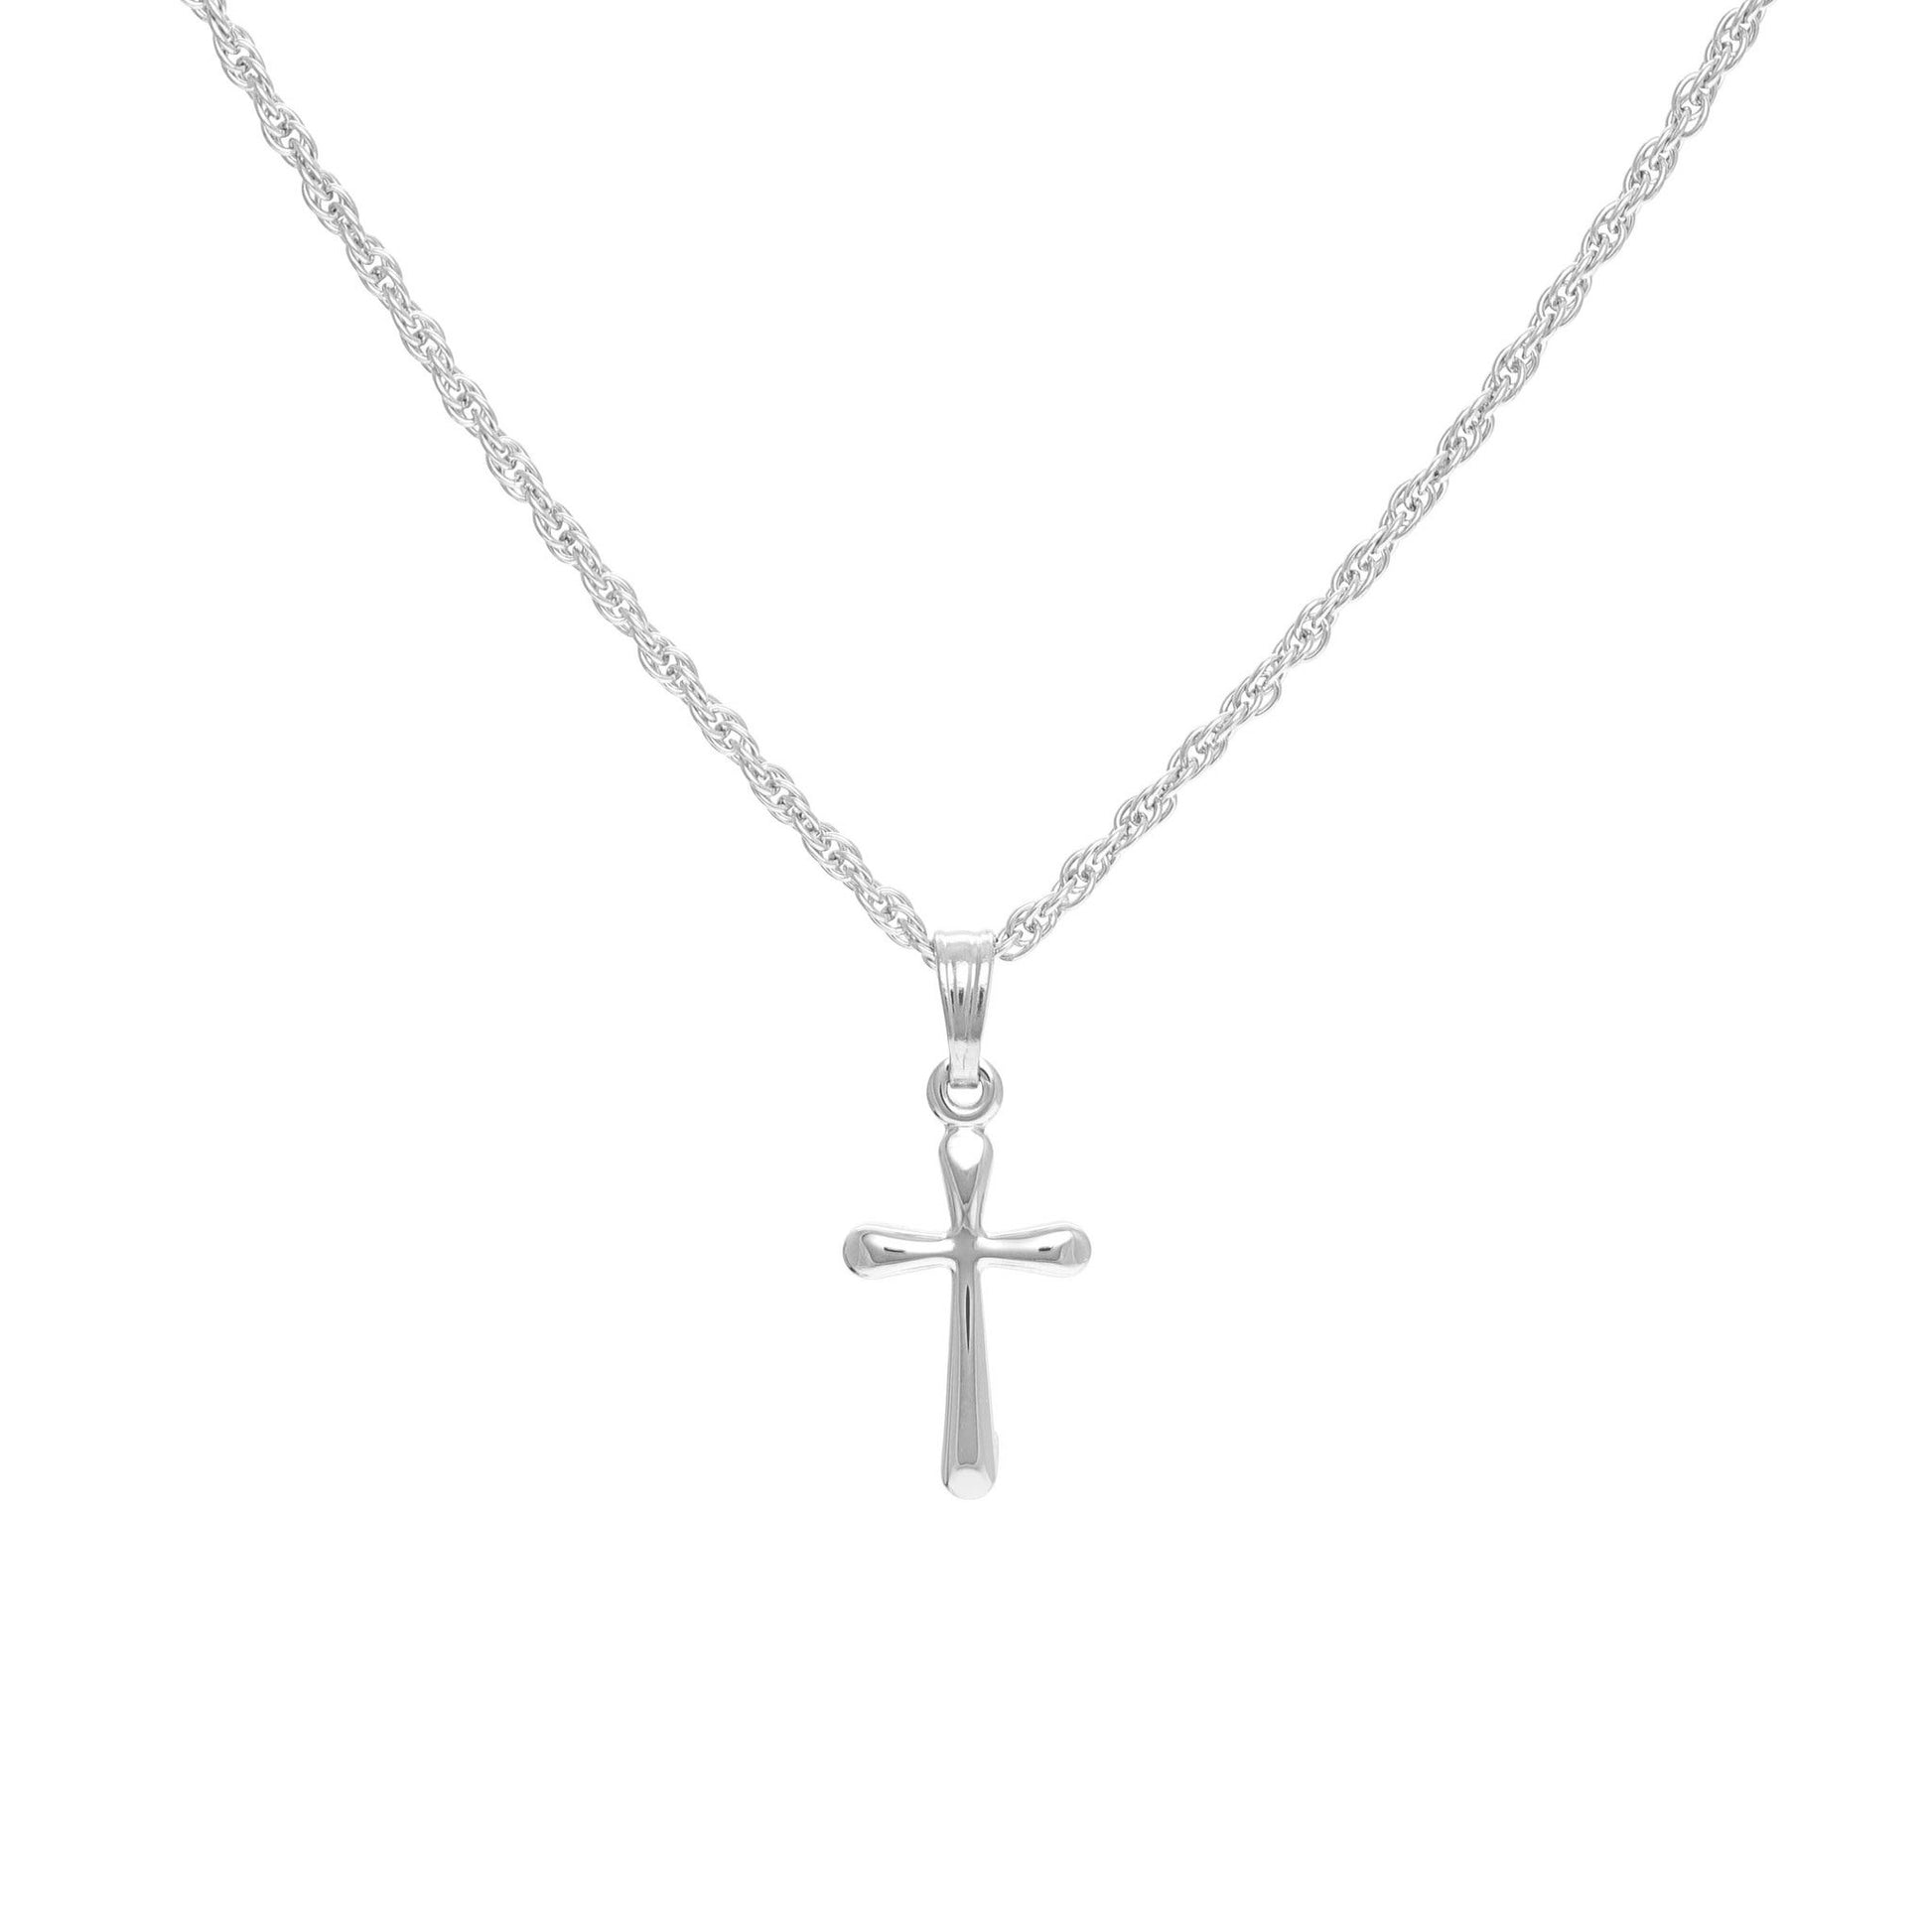 A plain rounded cross displayed on a neutral white background.